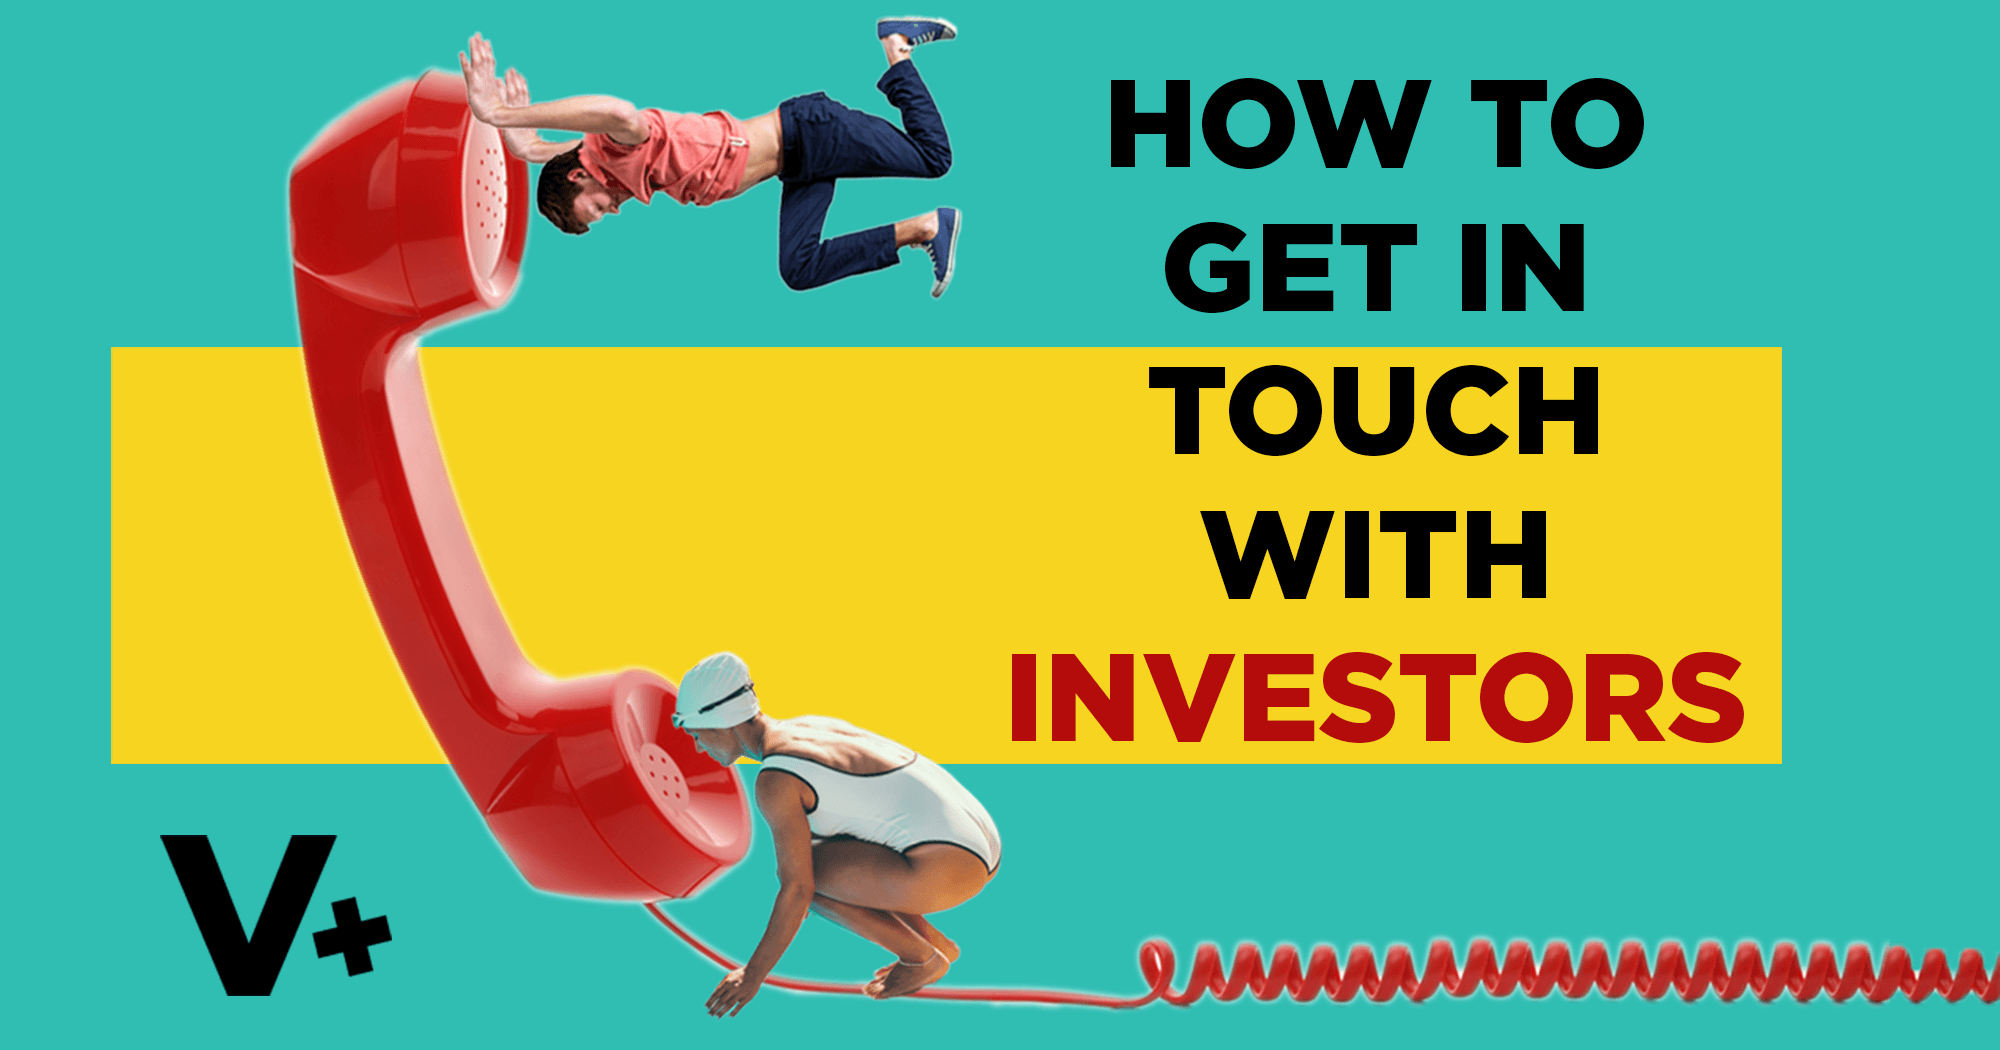 All You Need to Know About Getting in Touch with Investors